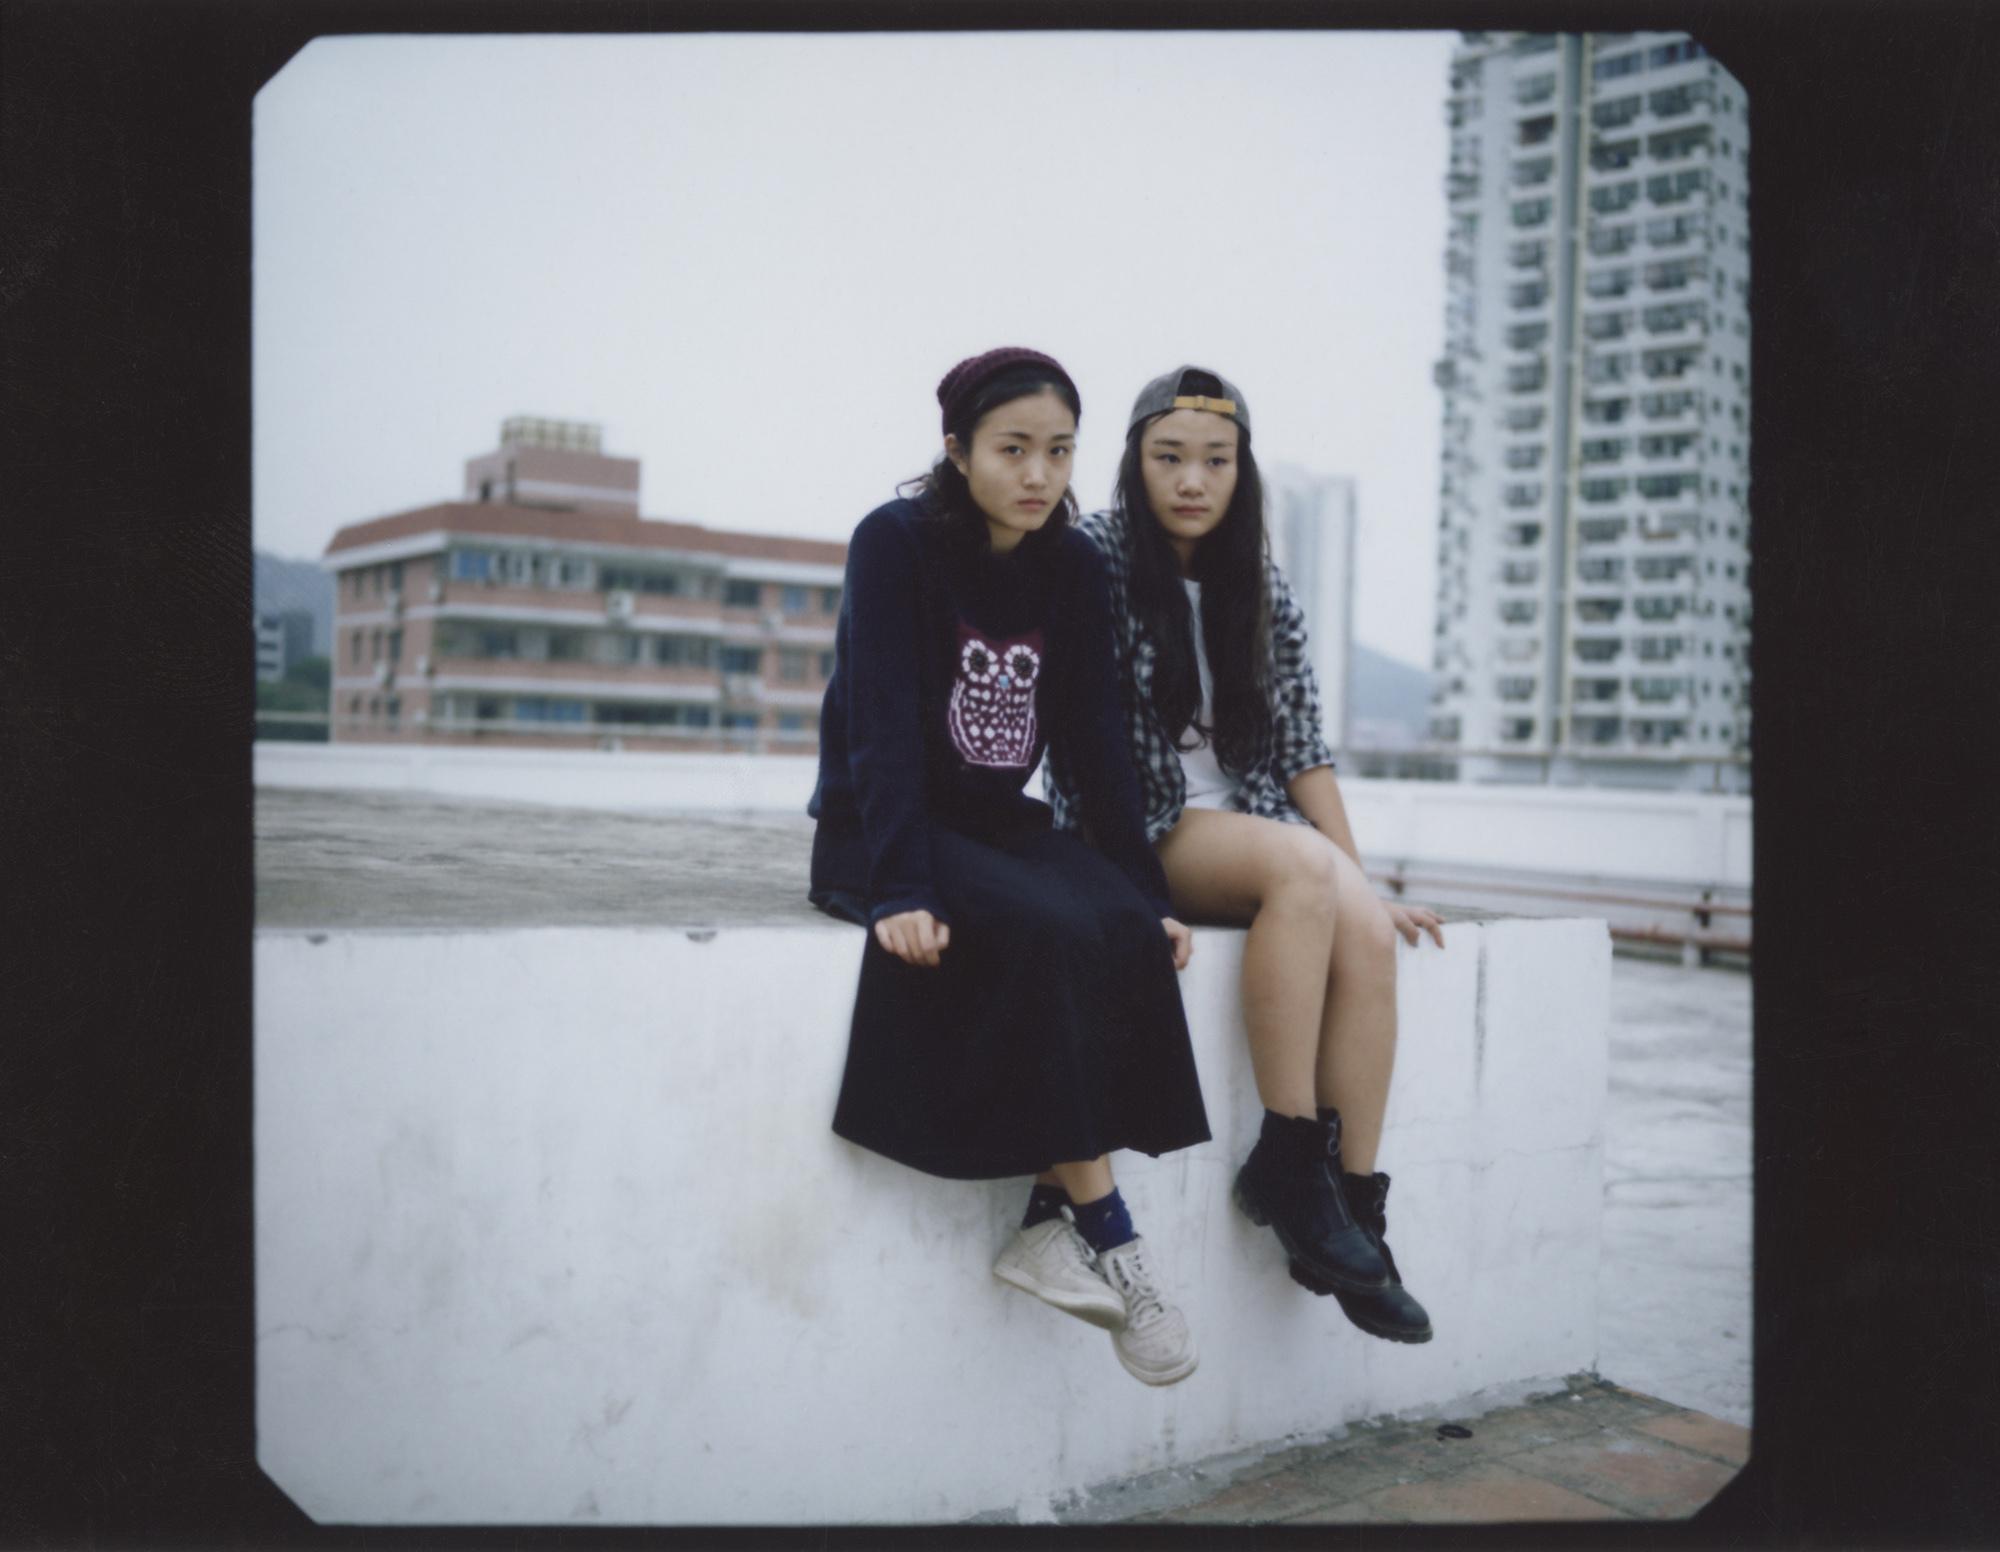 photographing the secret couples of china’s ‘garden island’ | read | i-D2000 x 1552